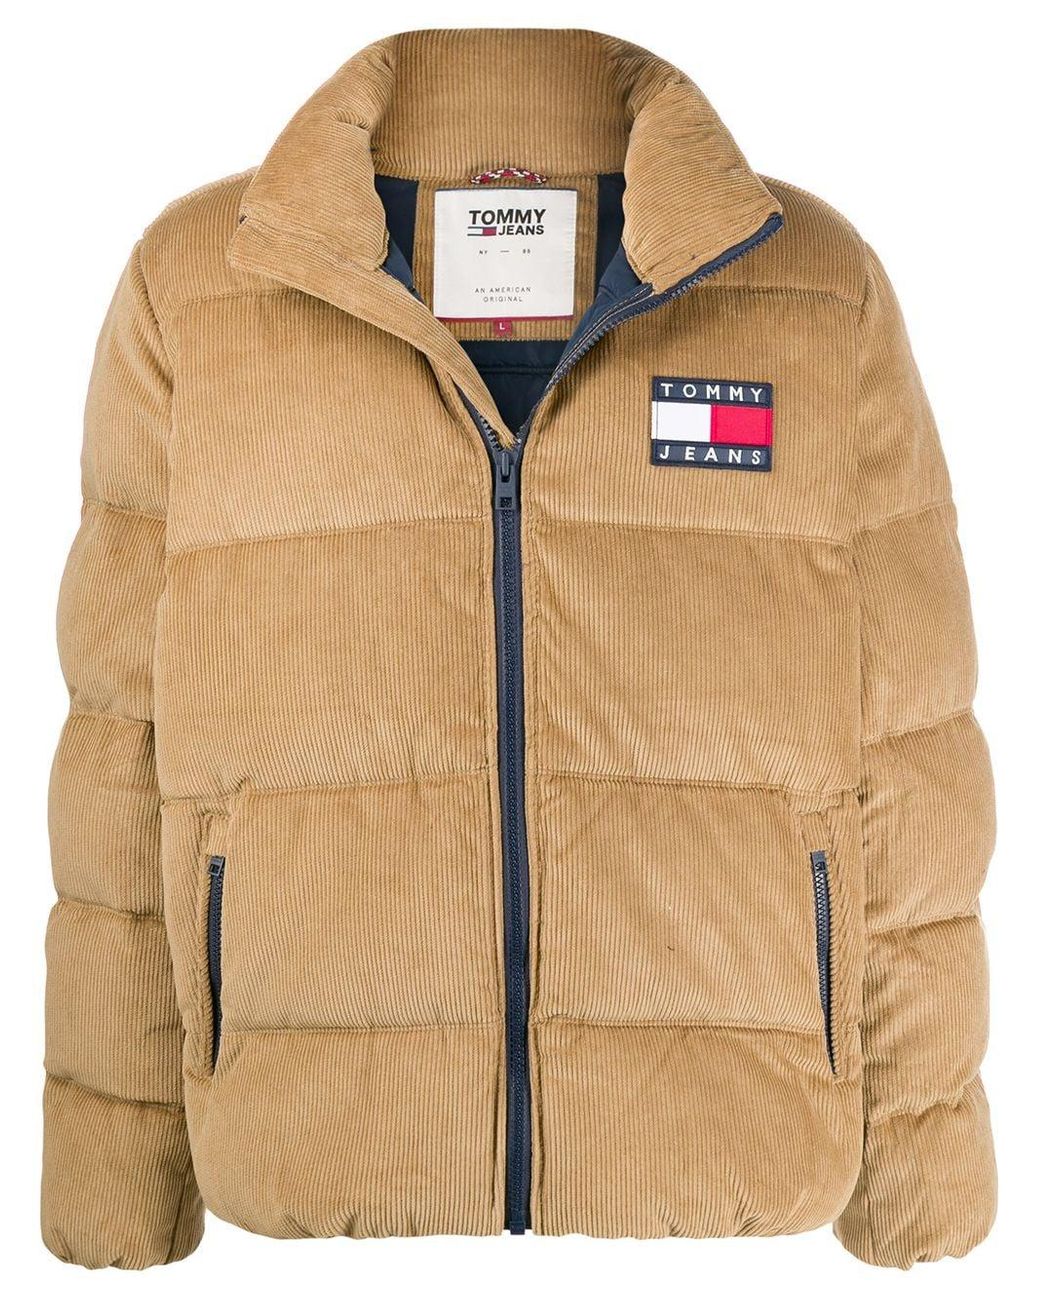 Tommy Hilfiger Cord Jacket Outlet Prices, 53% OFF | connect-summary.com